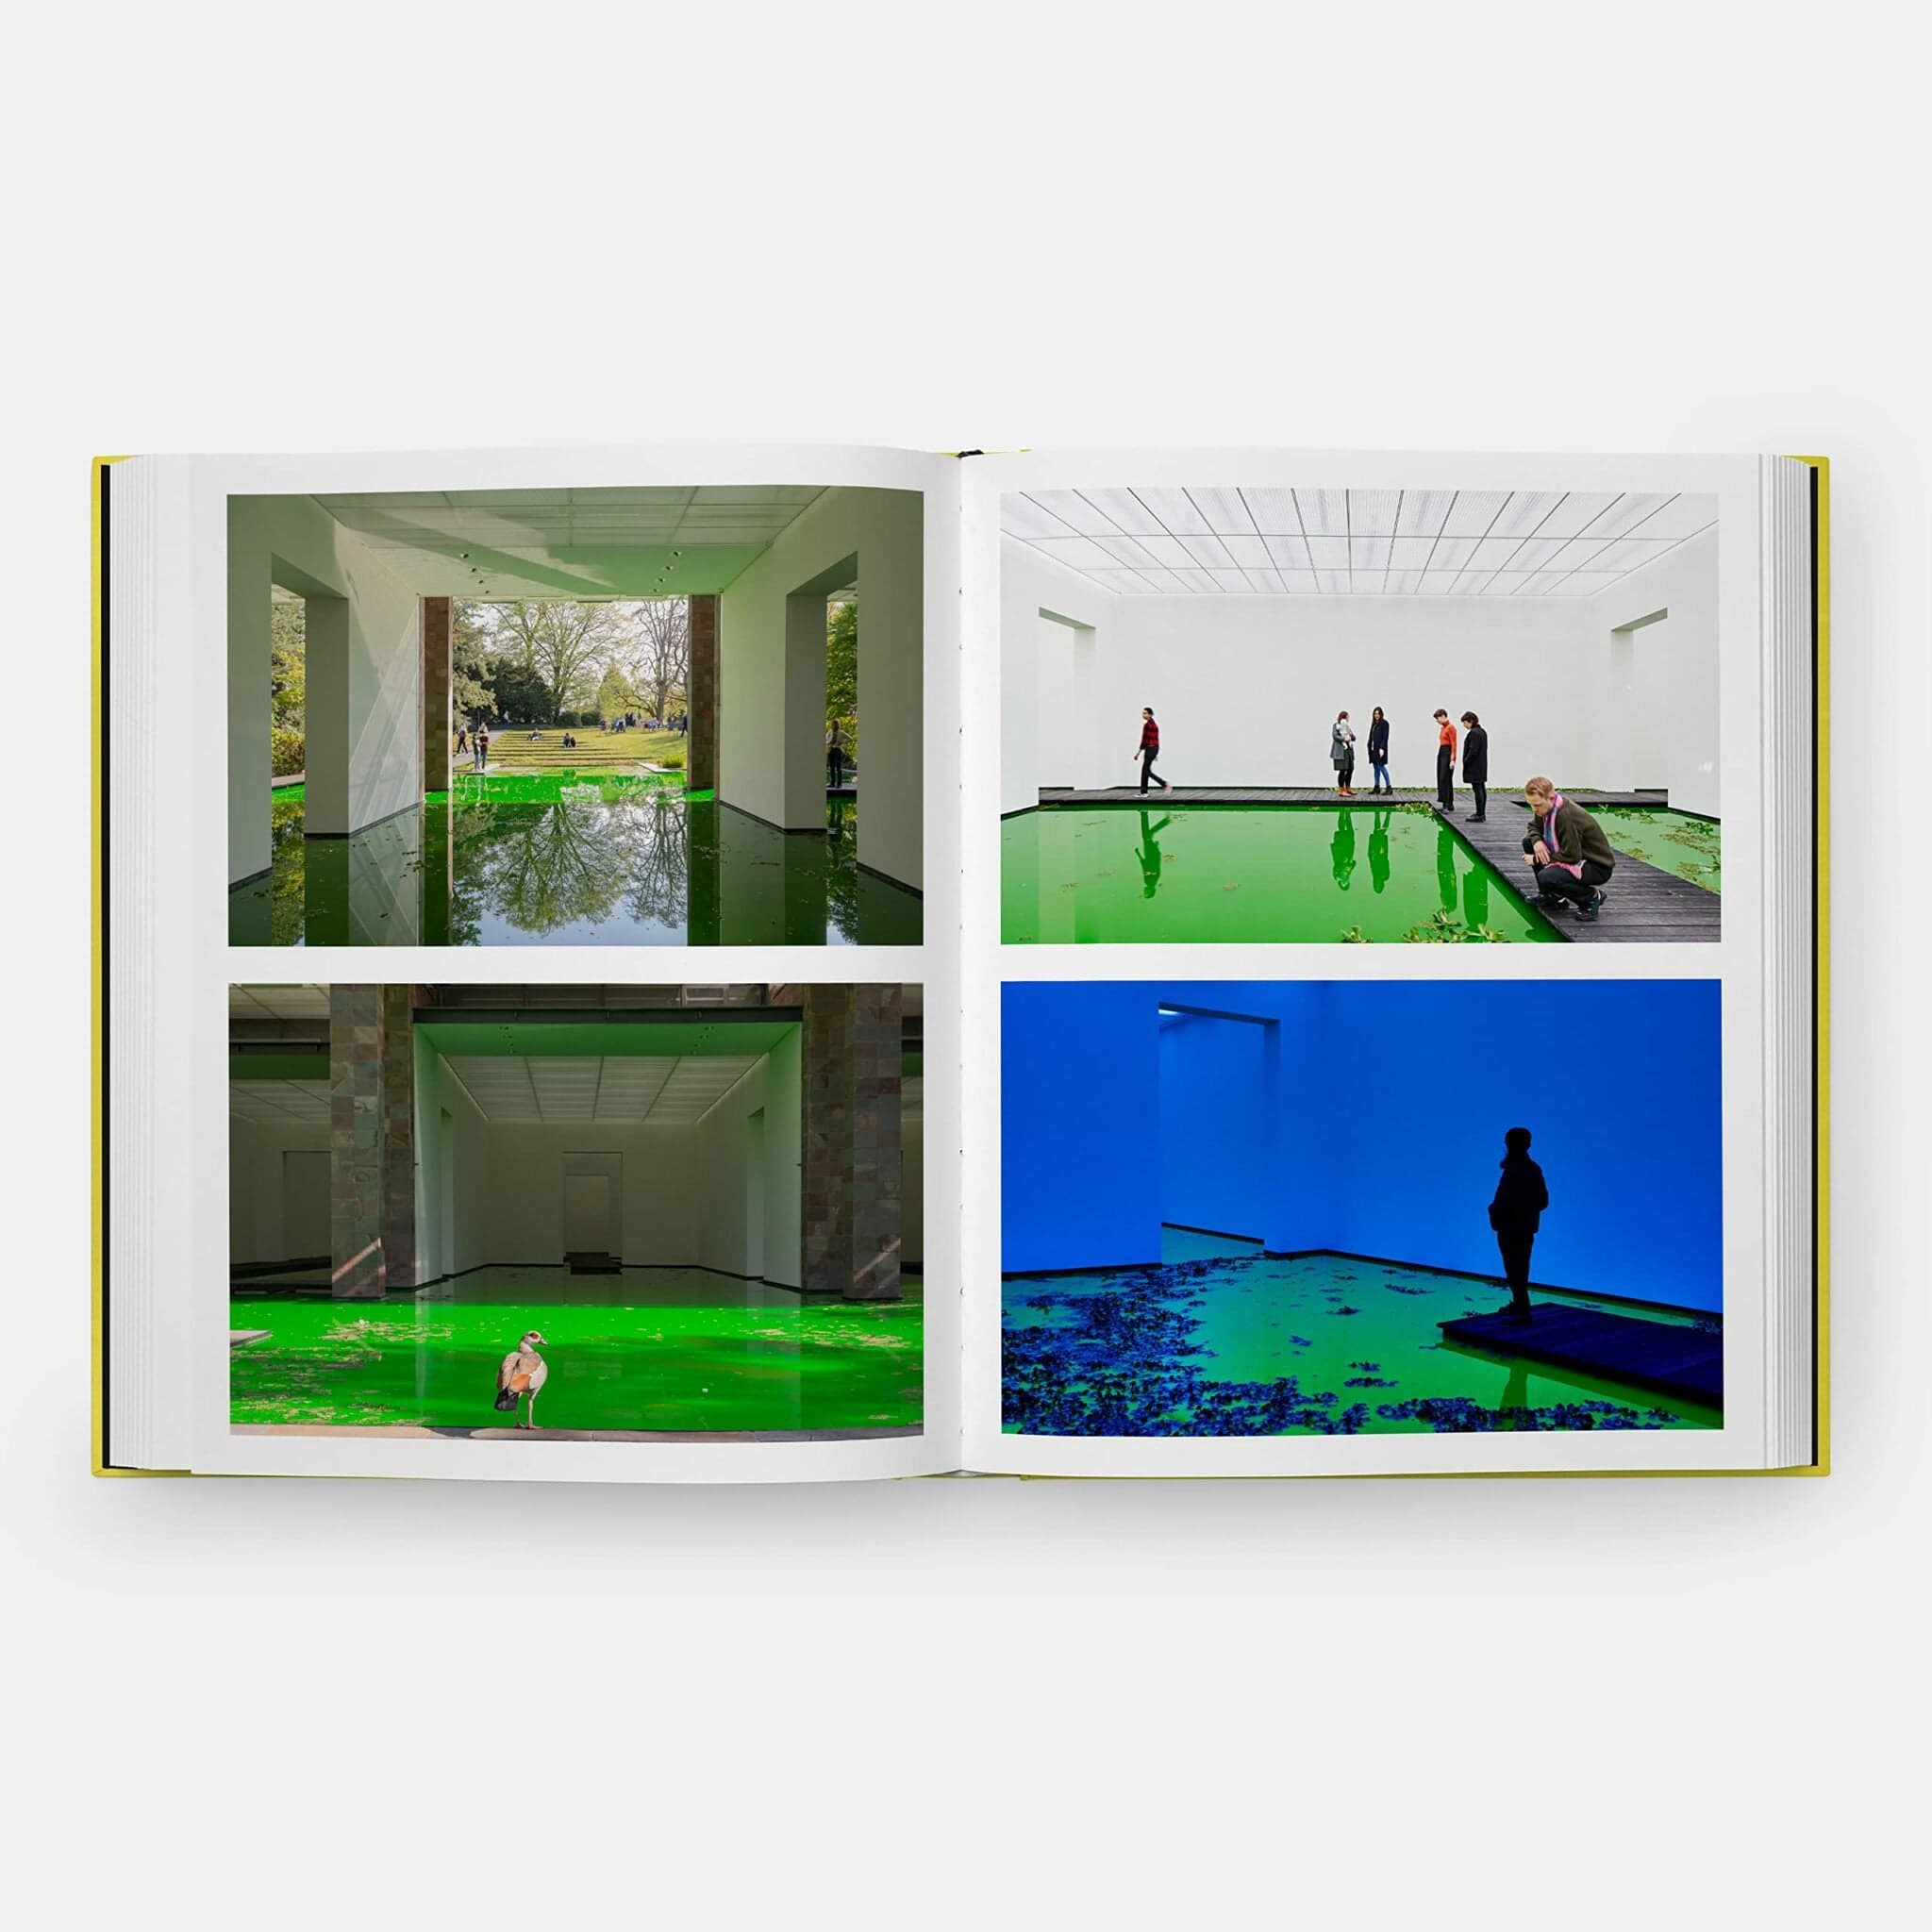 Olafur Eliasson, Experience - THAT COOL LIVING